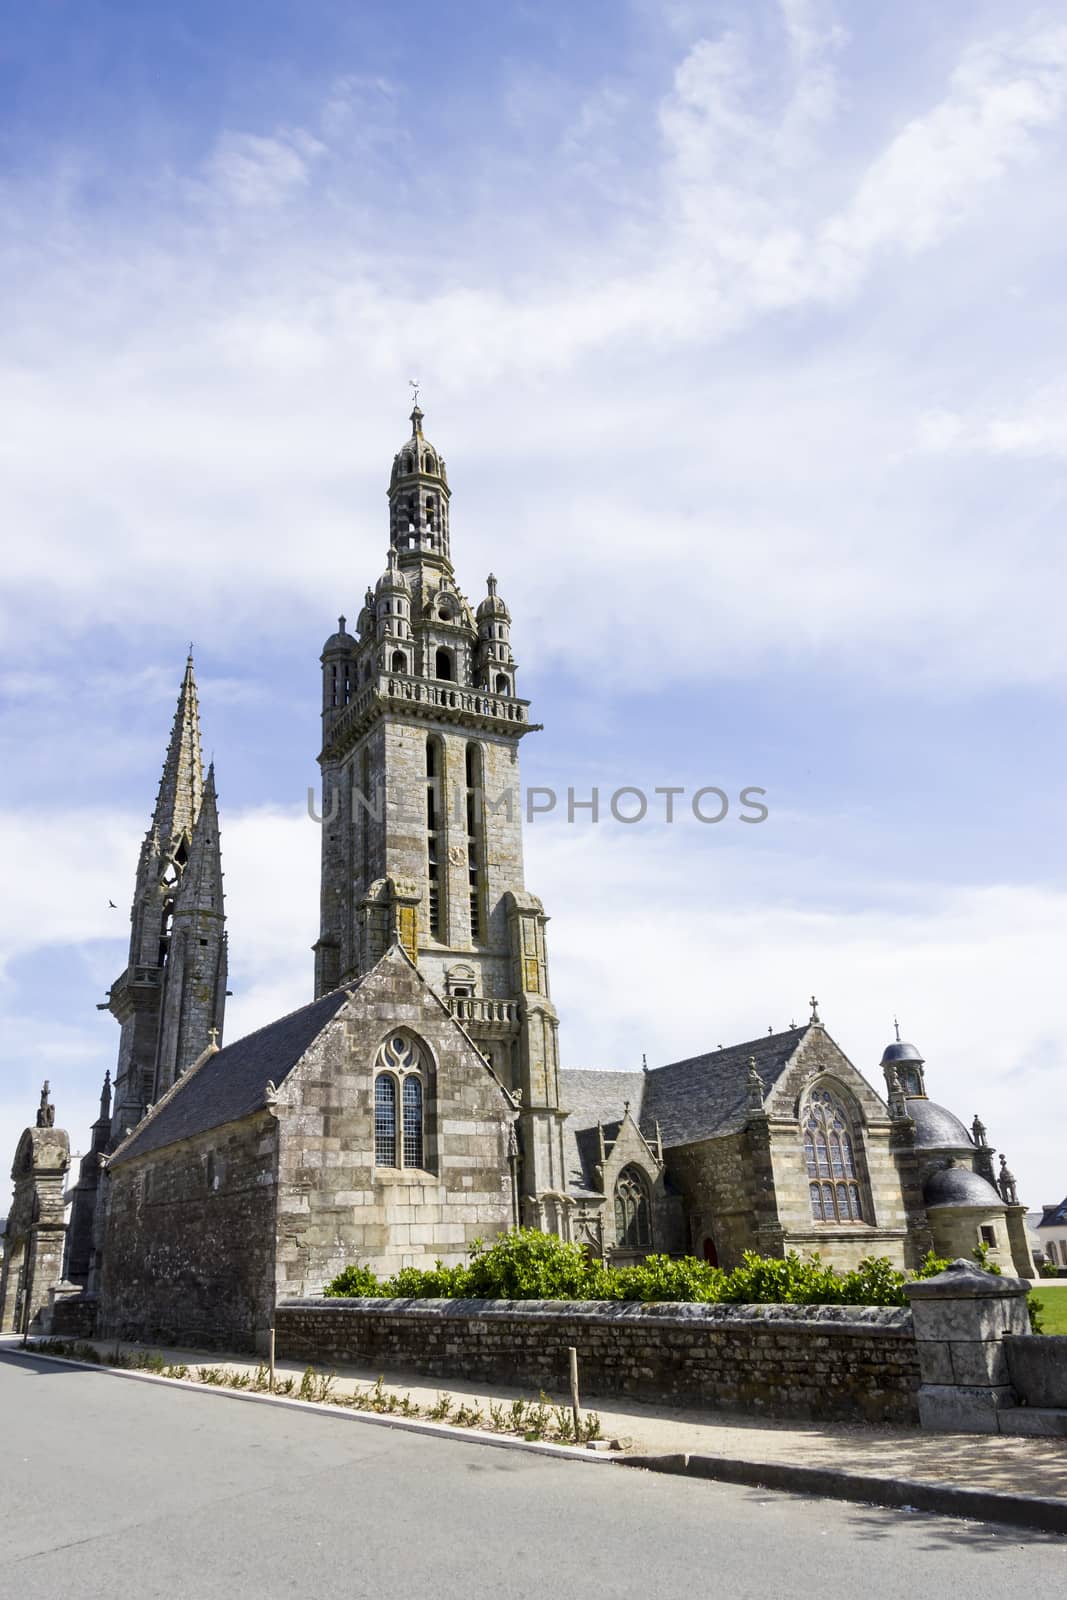 Gothic church in Brittany, France by Tetyana